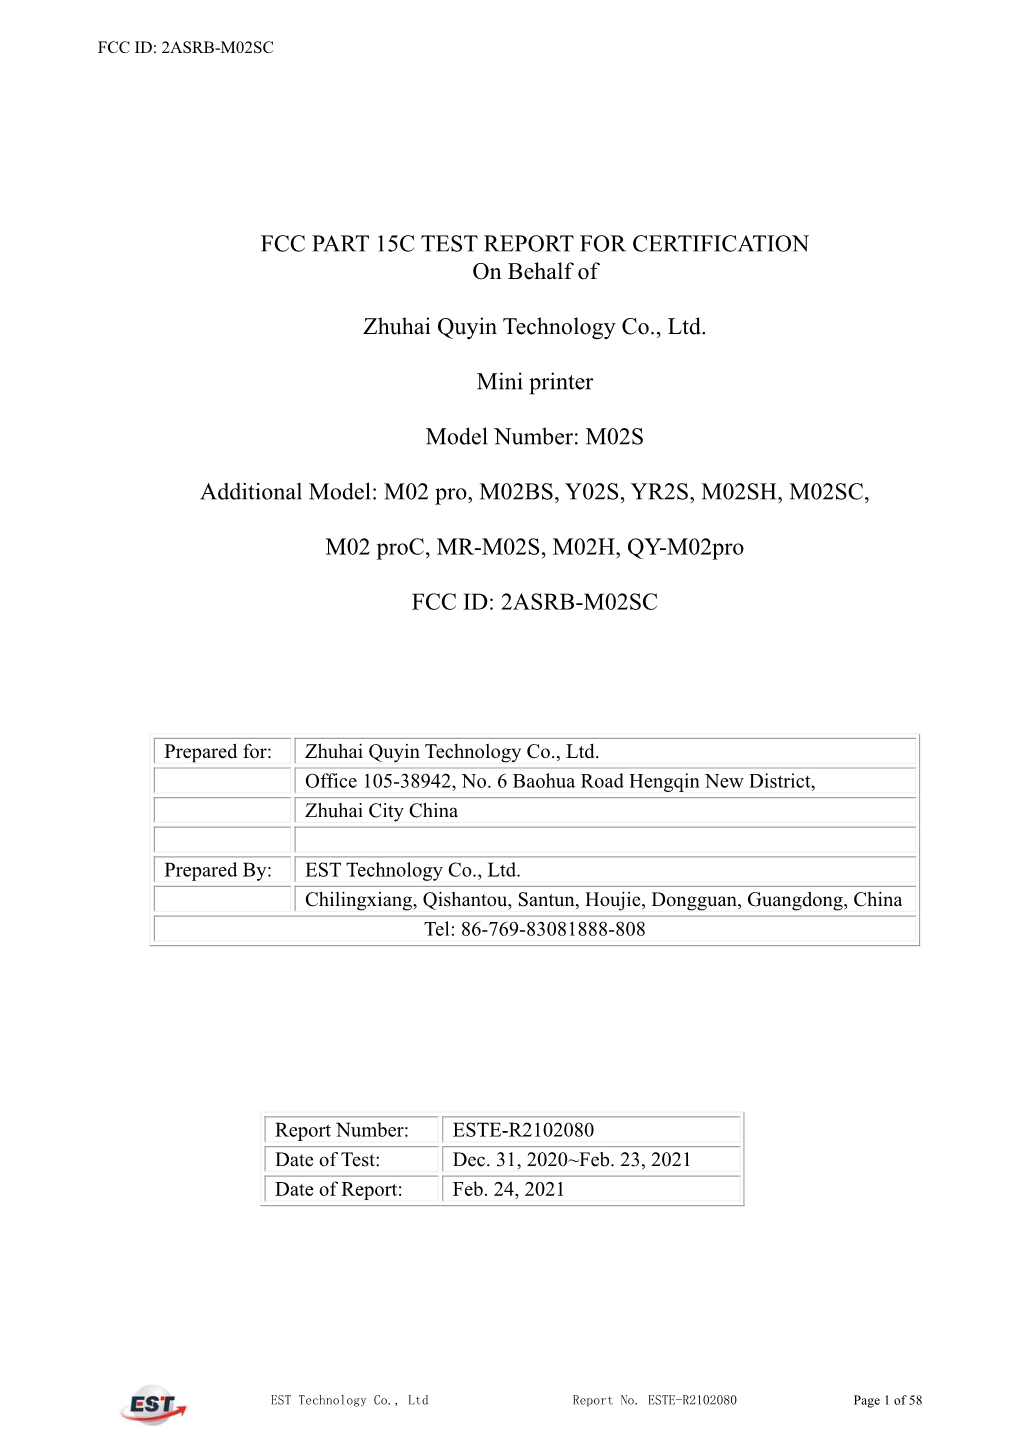 FCC PART 15C TEST REPORT for CERTIFICATION on Behalf Of